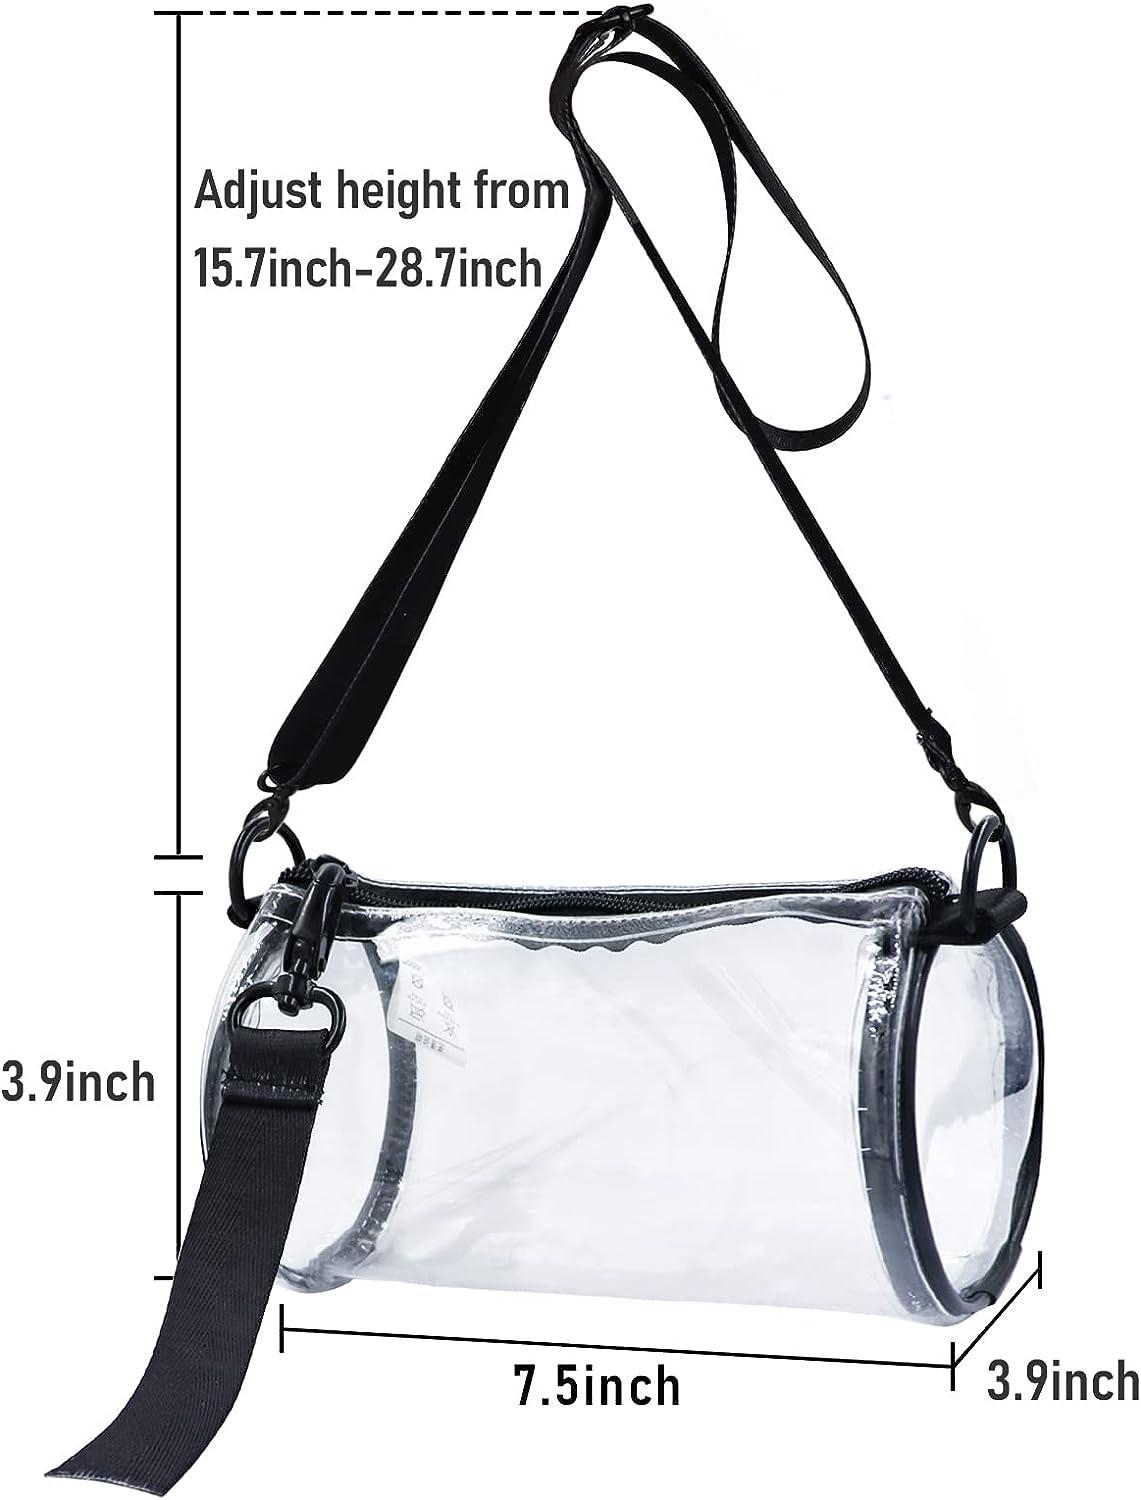 Missnine Clear Bag Stadium Approved PVC Crossbody Purse for Women